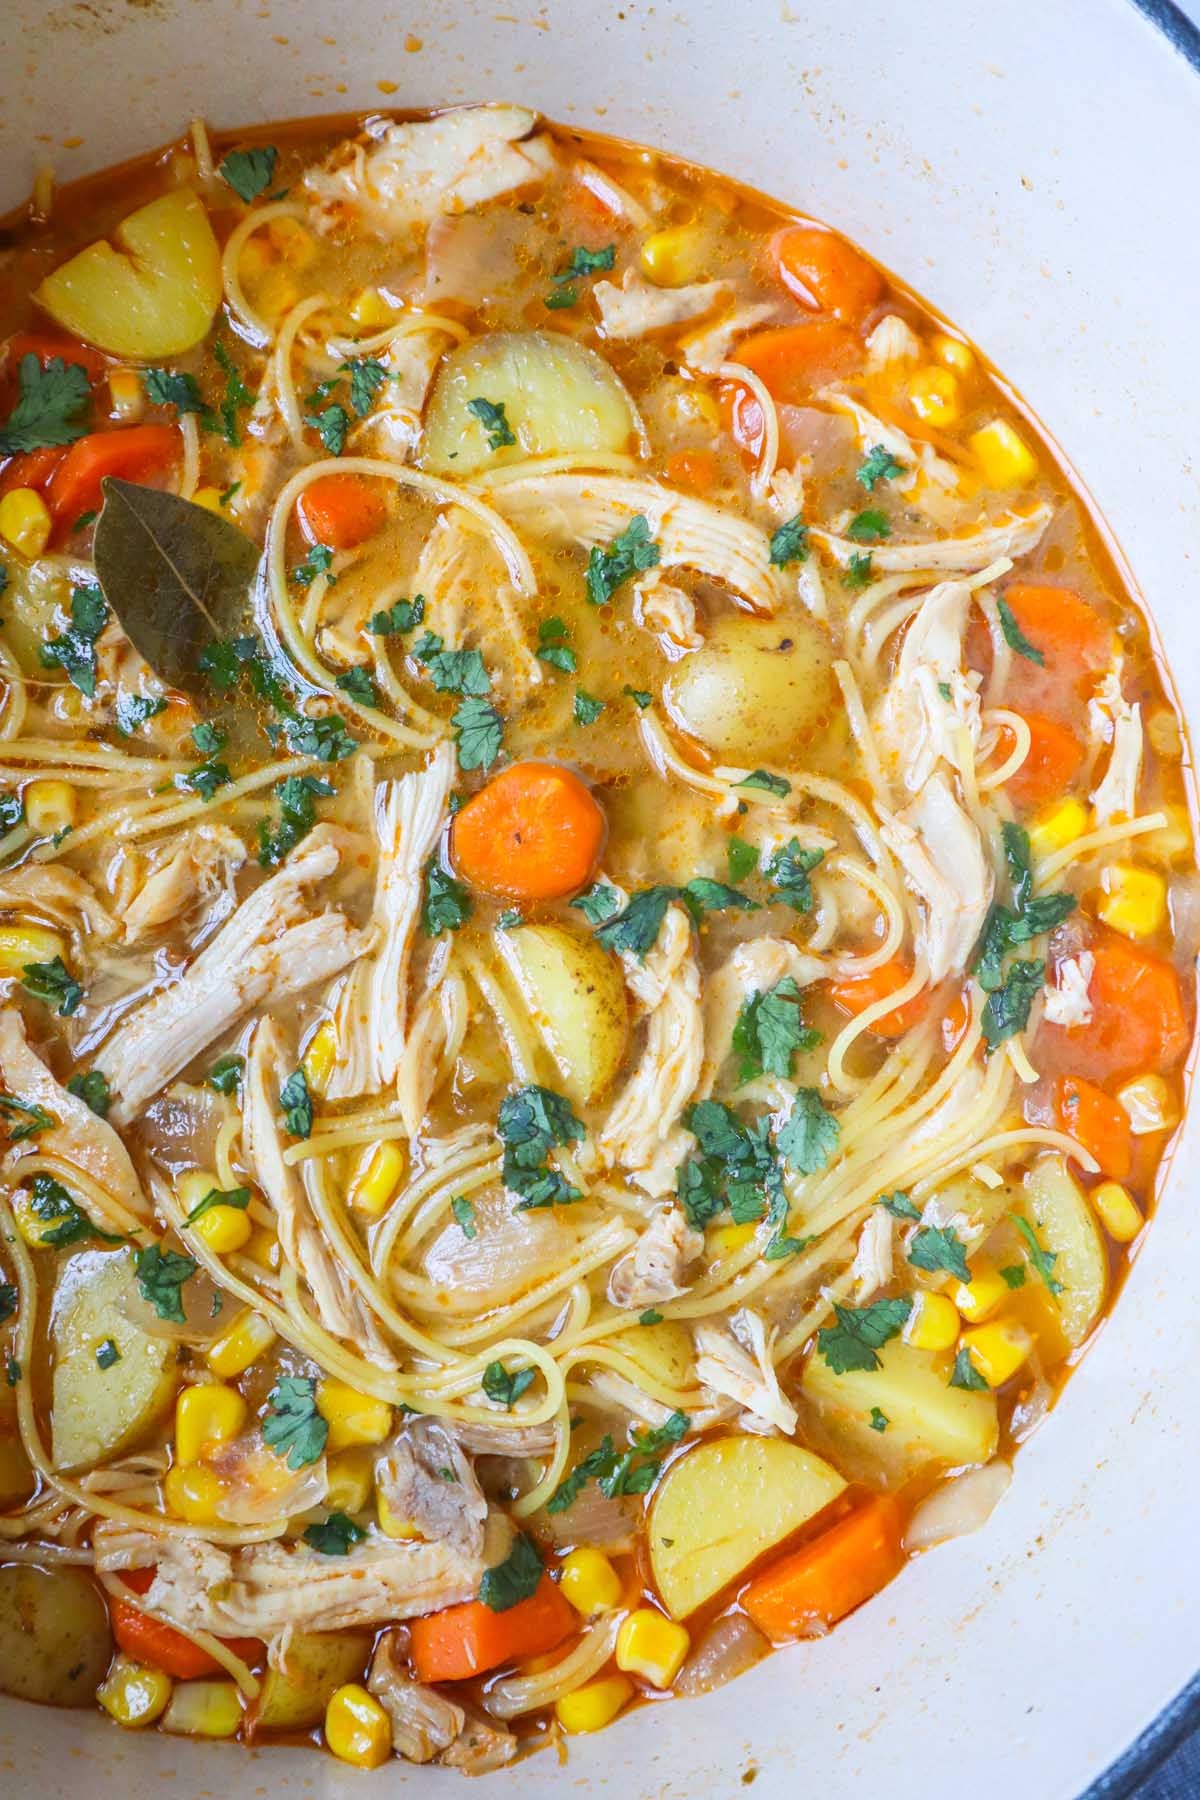 dutch oven with cuban soup with chicken, vegetables, and noodles topped with fresh herbs